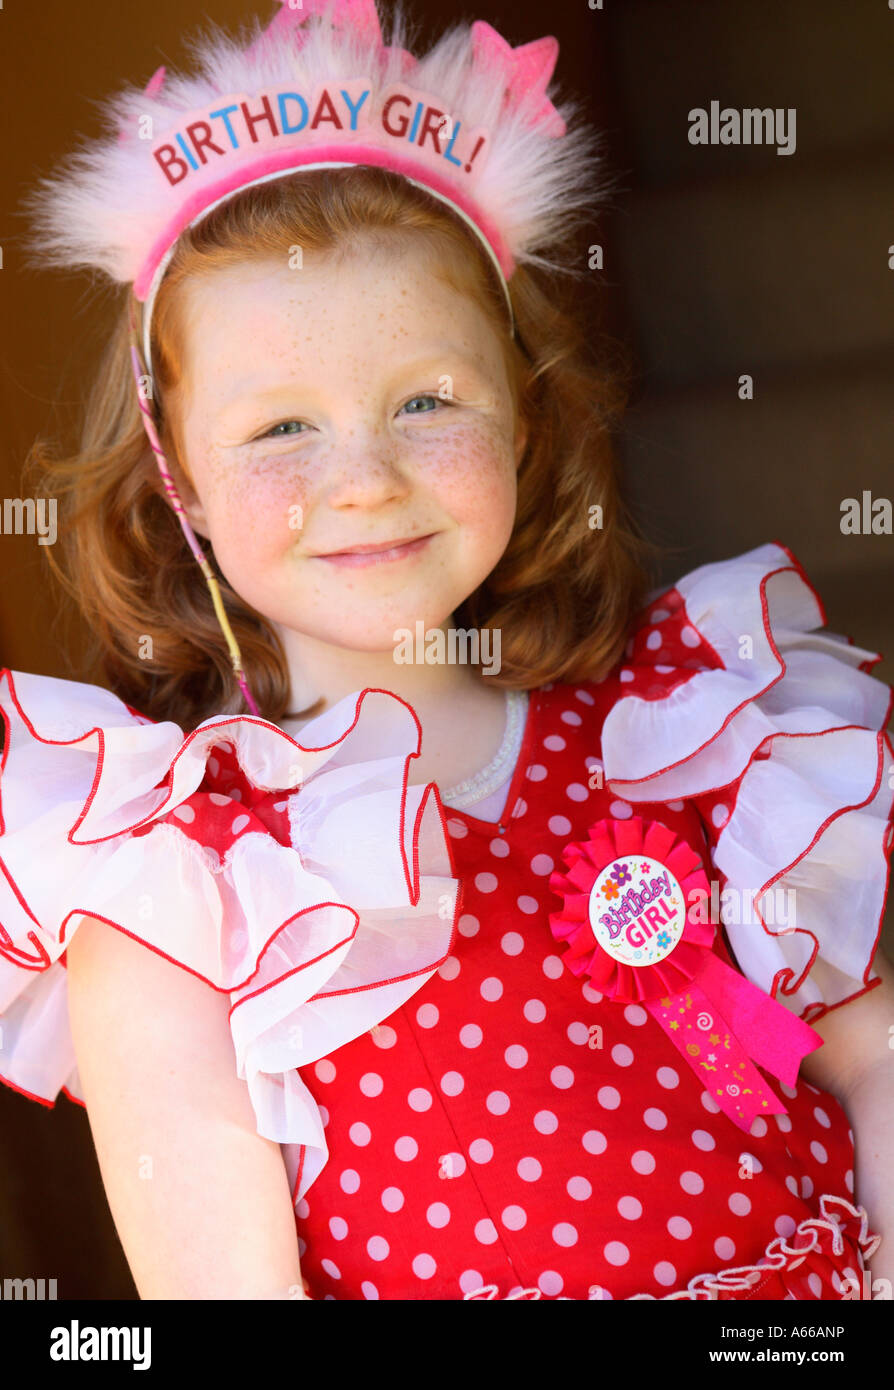 a small girl dressed up for her birthday party Stock Photo